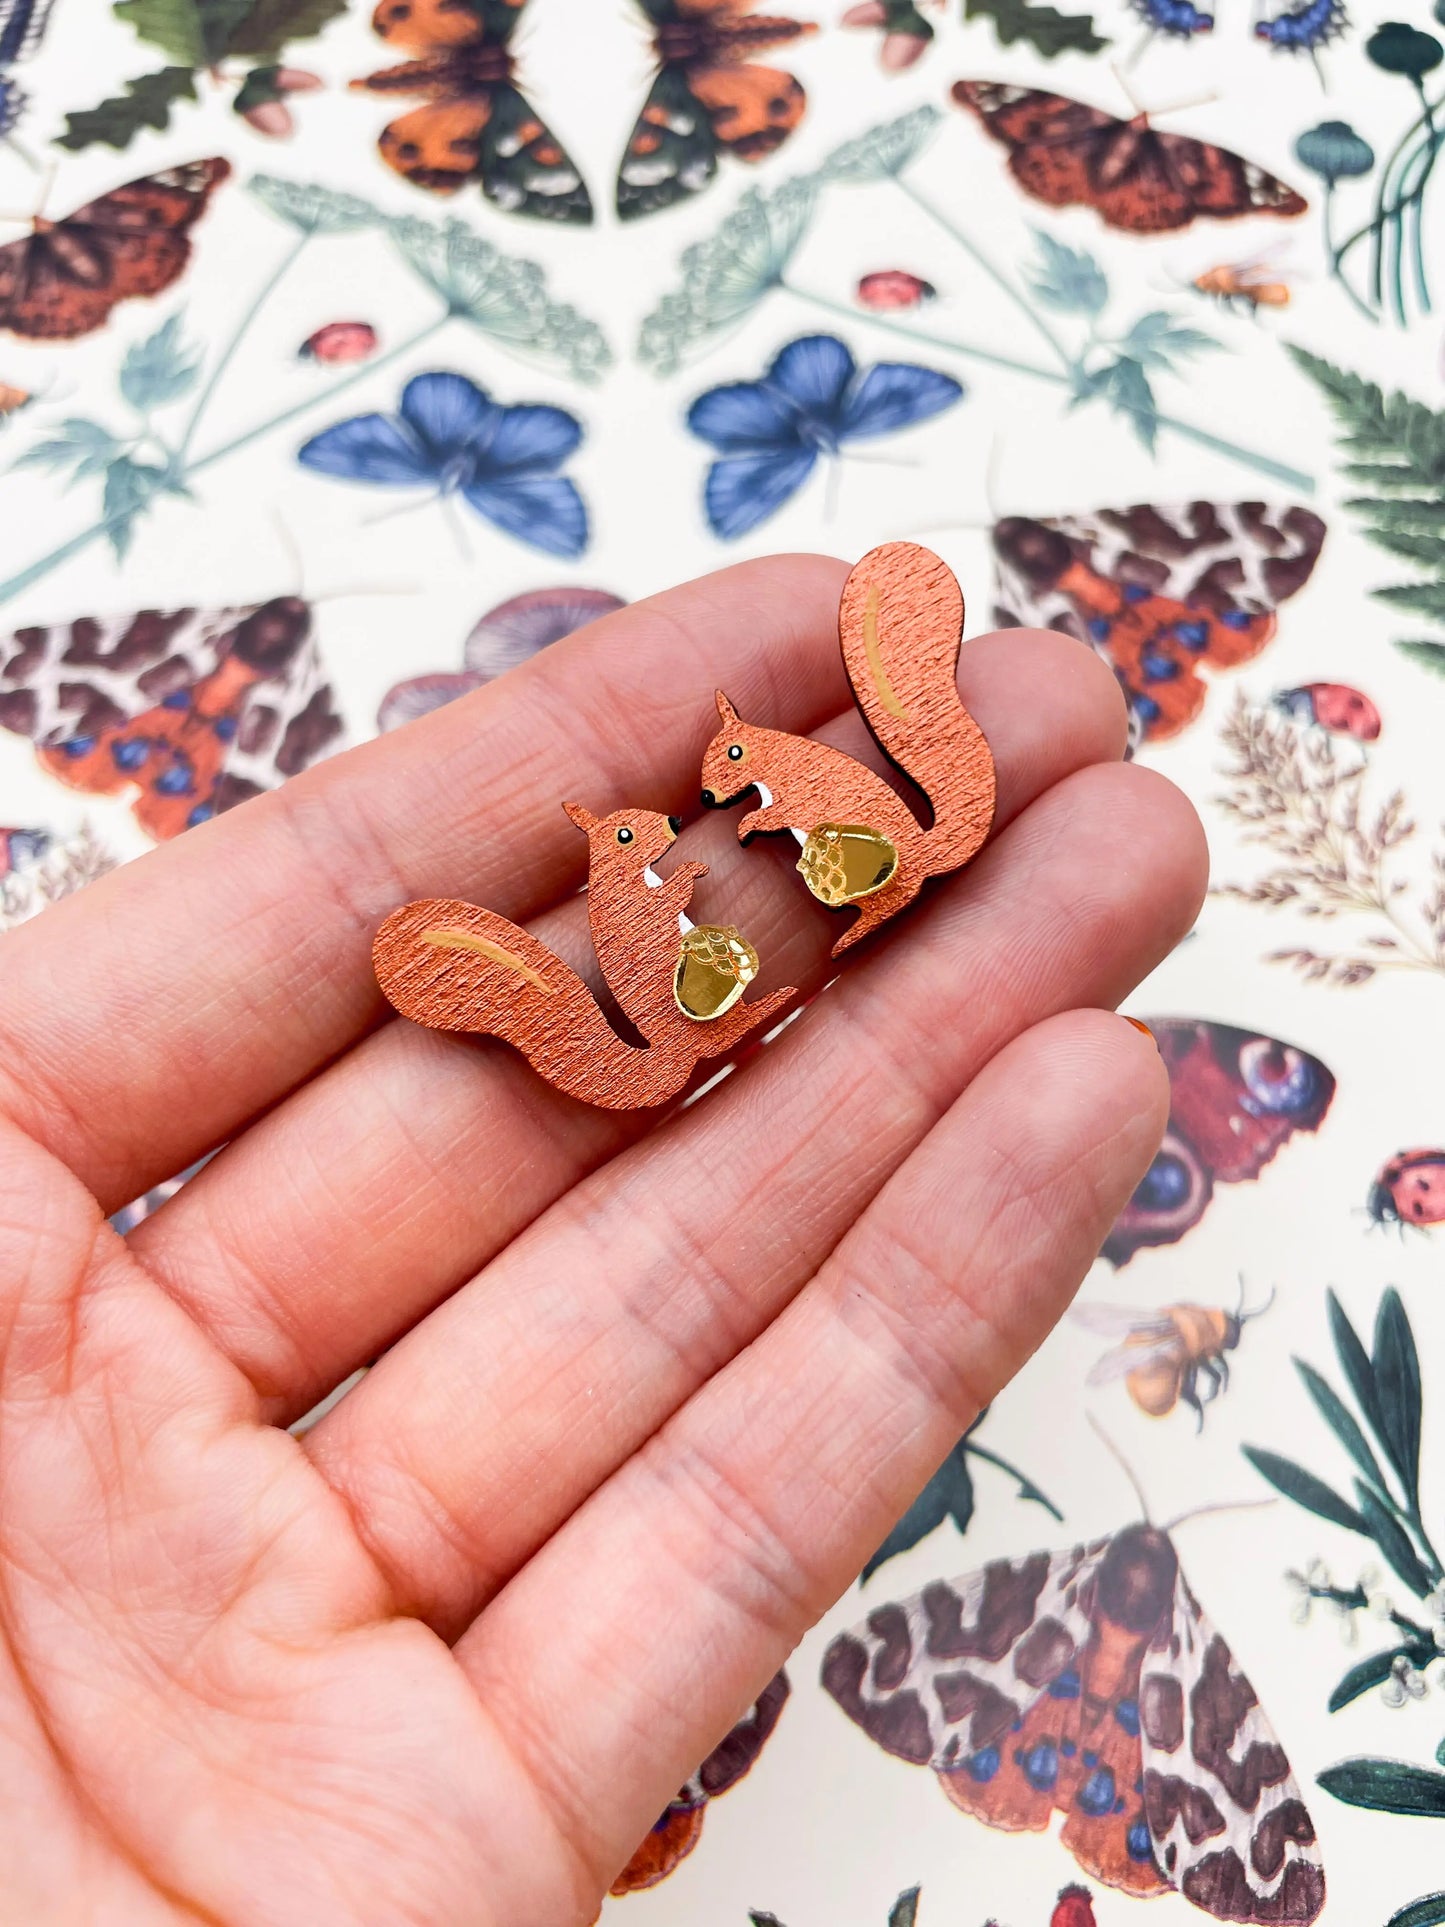 Medium Copper and Gold Acrylic Mirror Squirrel Stud Earrings from Sapphire Frills